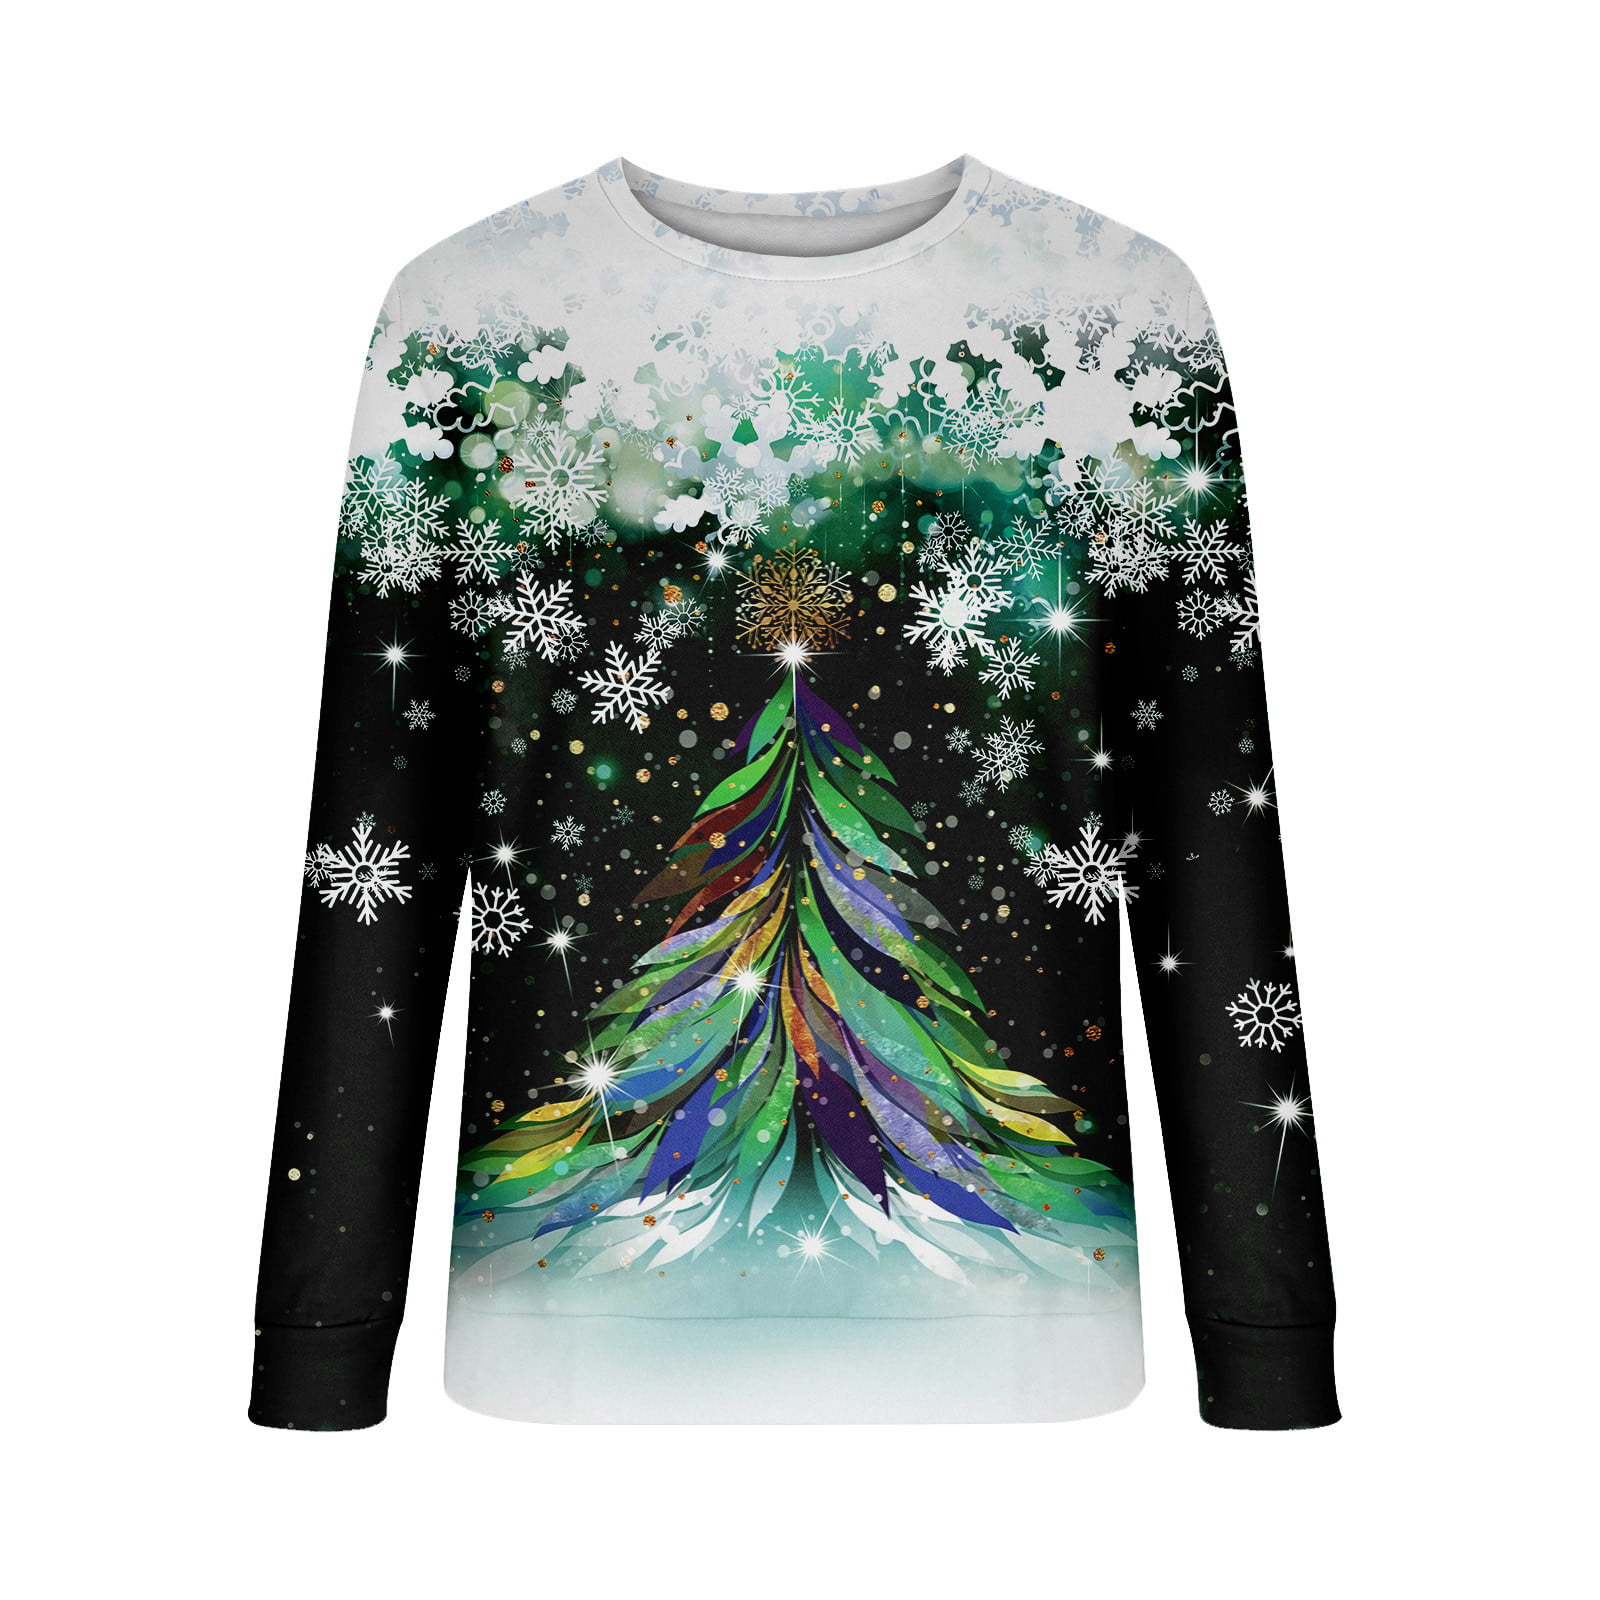 Ugly Christmas Sweater for Women Fashion Women Print Long Sleeve  Comfortable Breathable Round-Neck Sweatshirt,Purple,S 